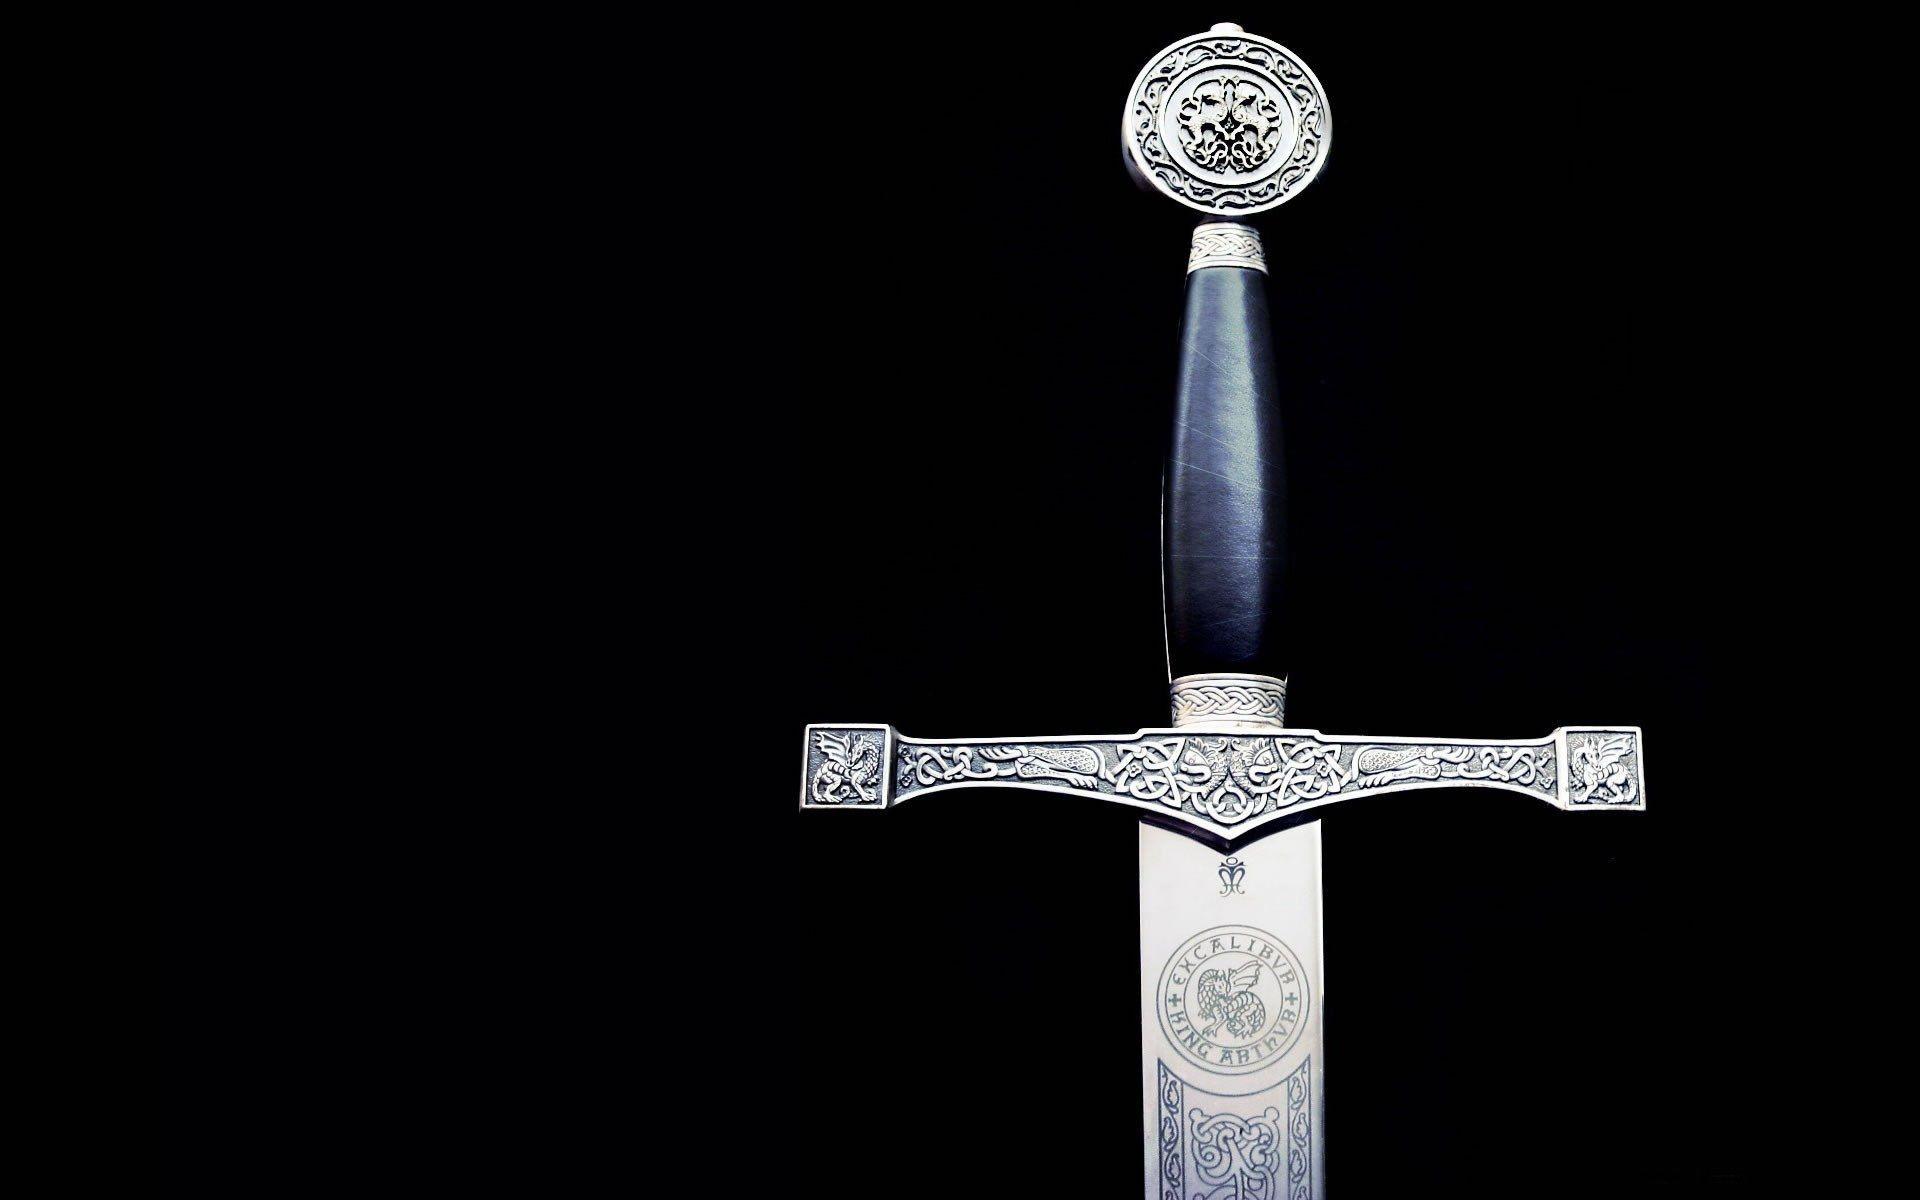 Sword Wallpaper, Sword Wallpaper. Sword Awesome Photo Collection